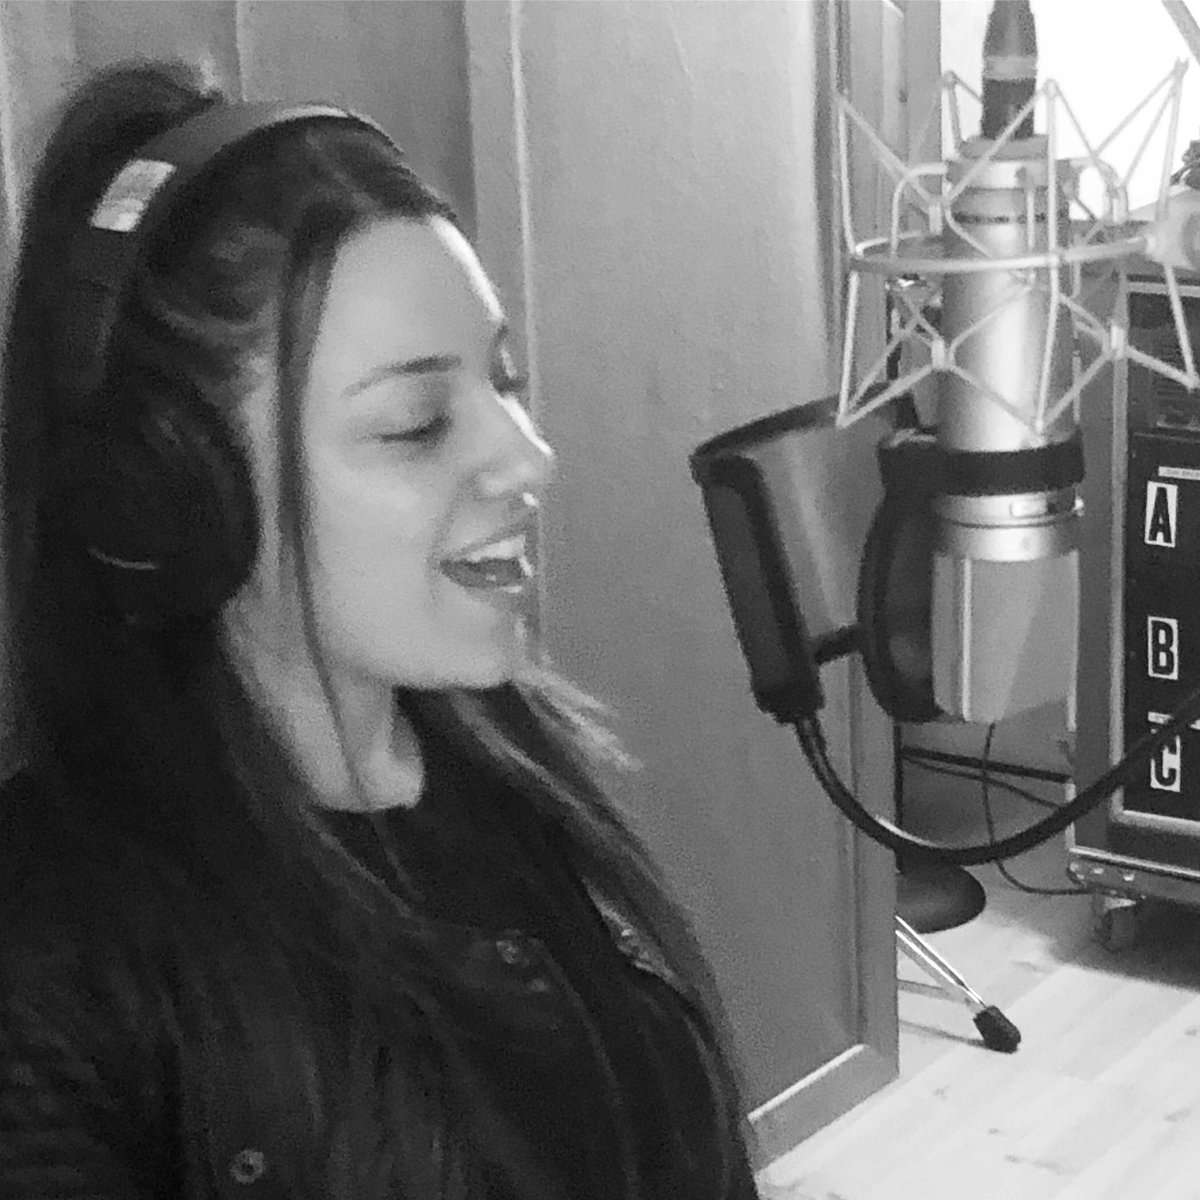 test Twitter Media - Vocal Session With The Awesome @melissacartermusic Check Her Out & Catch A Show... Great Singer, Great Songs! Happy To Play Drums On Her Record. #singersongwriter #recordingartist #recordingstudio @dwdrums @paistecymbals @vicfirth #melissagottliebmusic https://t.co/xqe0VAyEUr